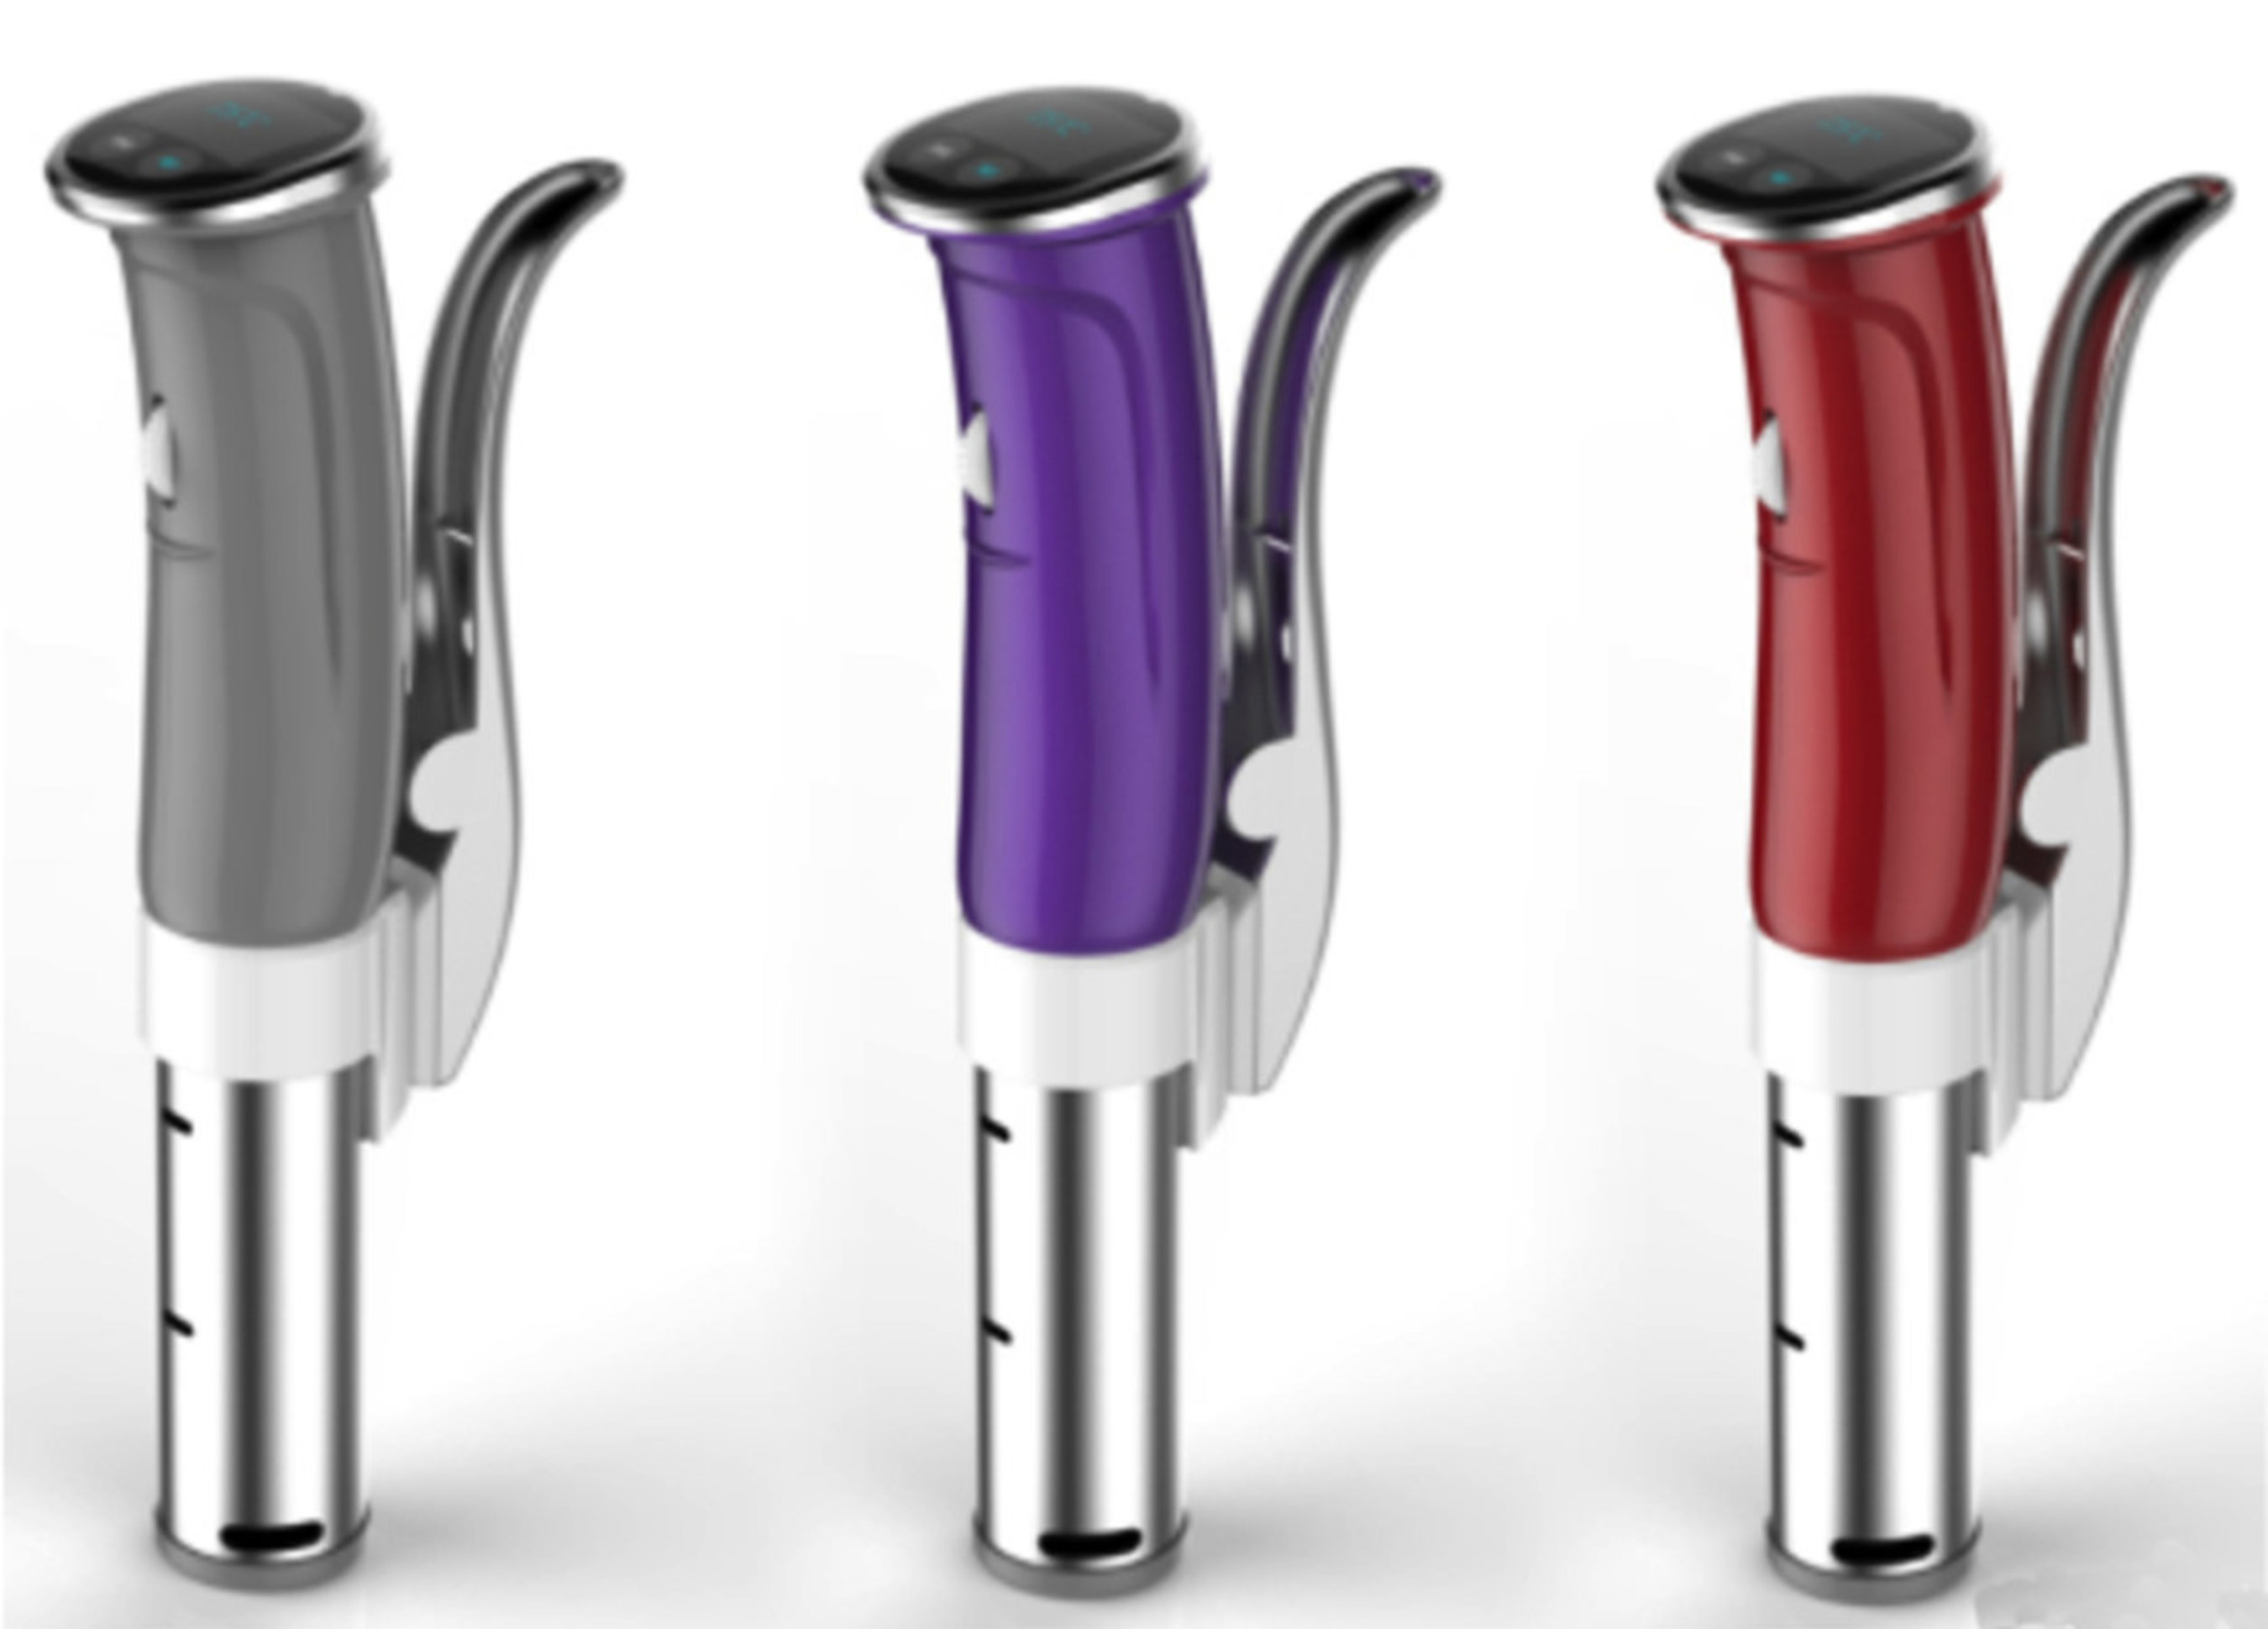 Gourmia's new Wi-Fi and Bluetooth-enabled Sous Vide pod will include a mobile app with recipes from Jason Logsdon of ModernistCookingMadeEasy.com.